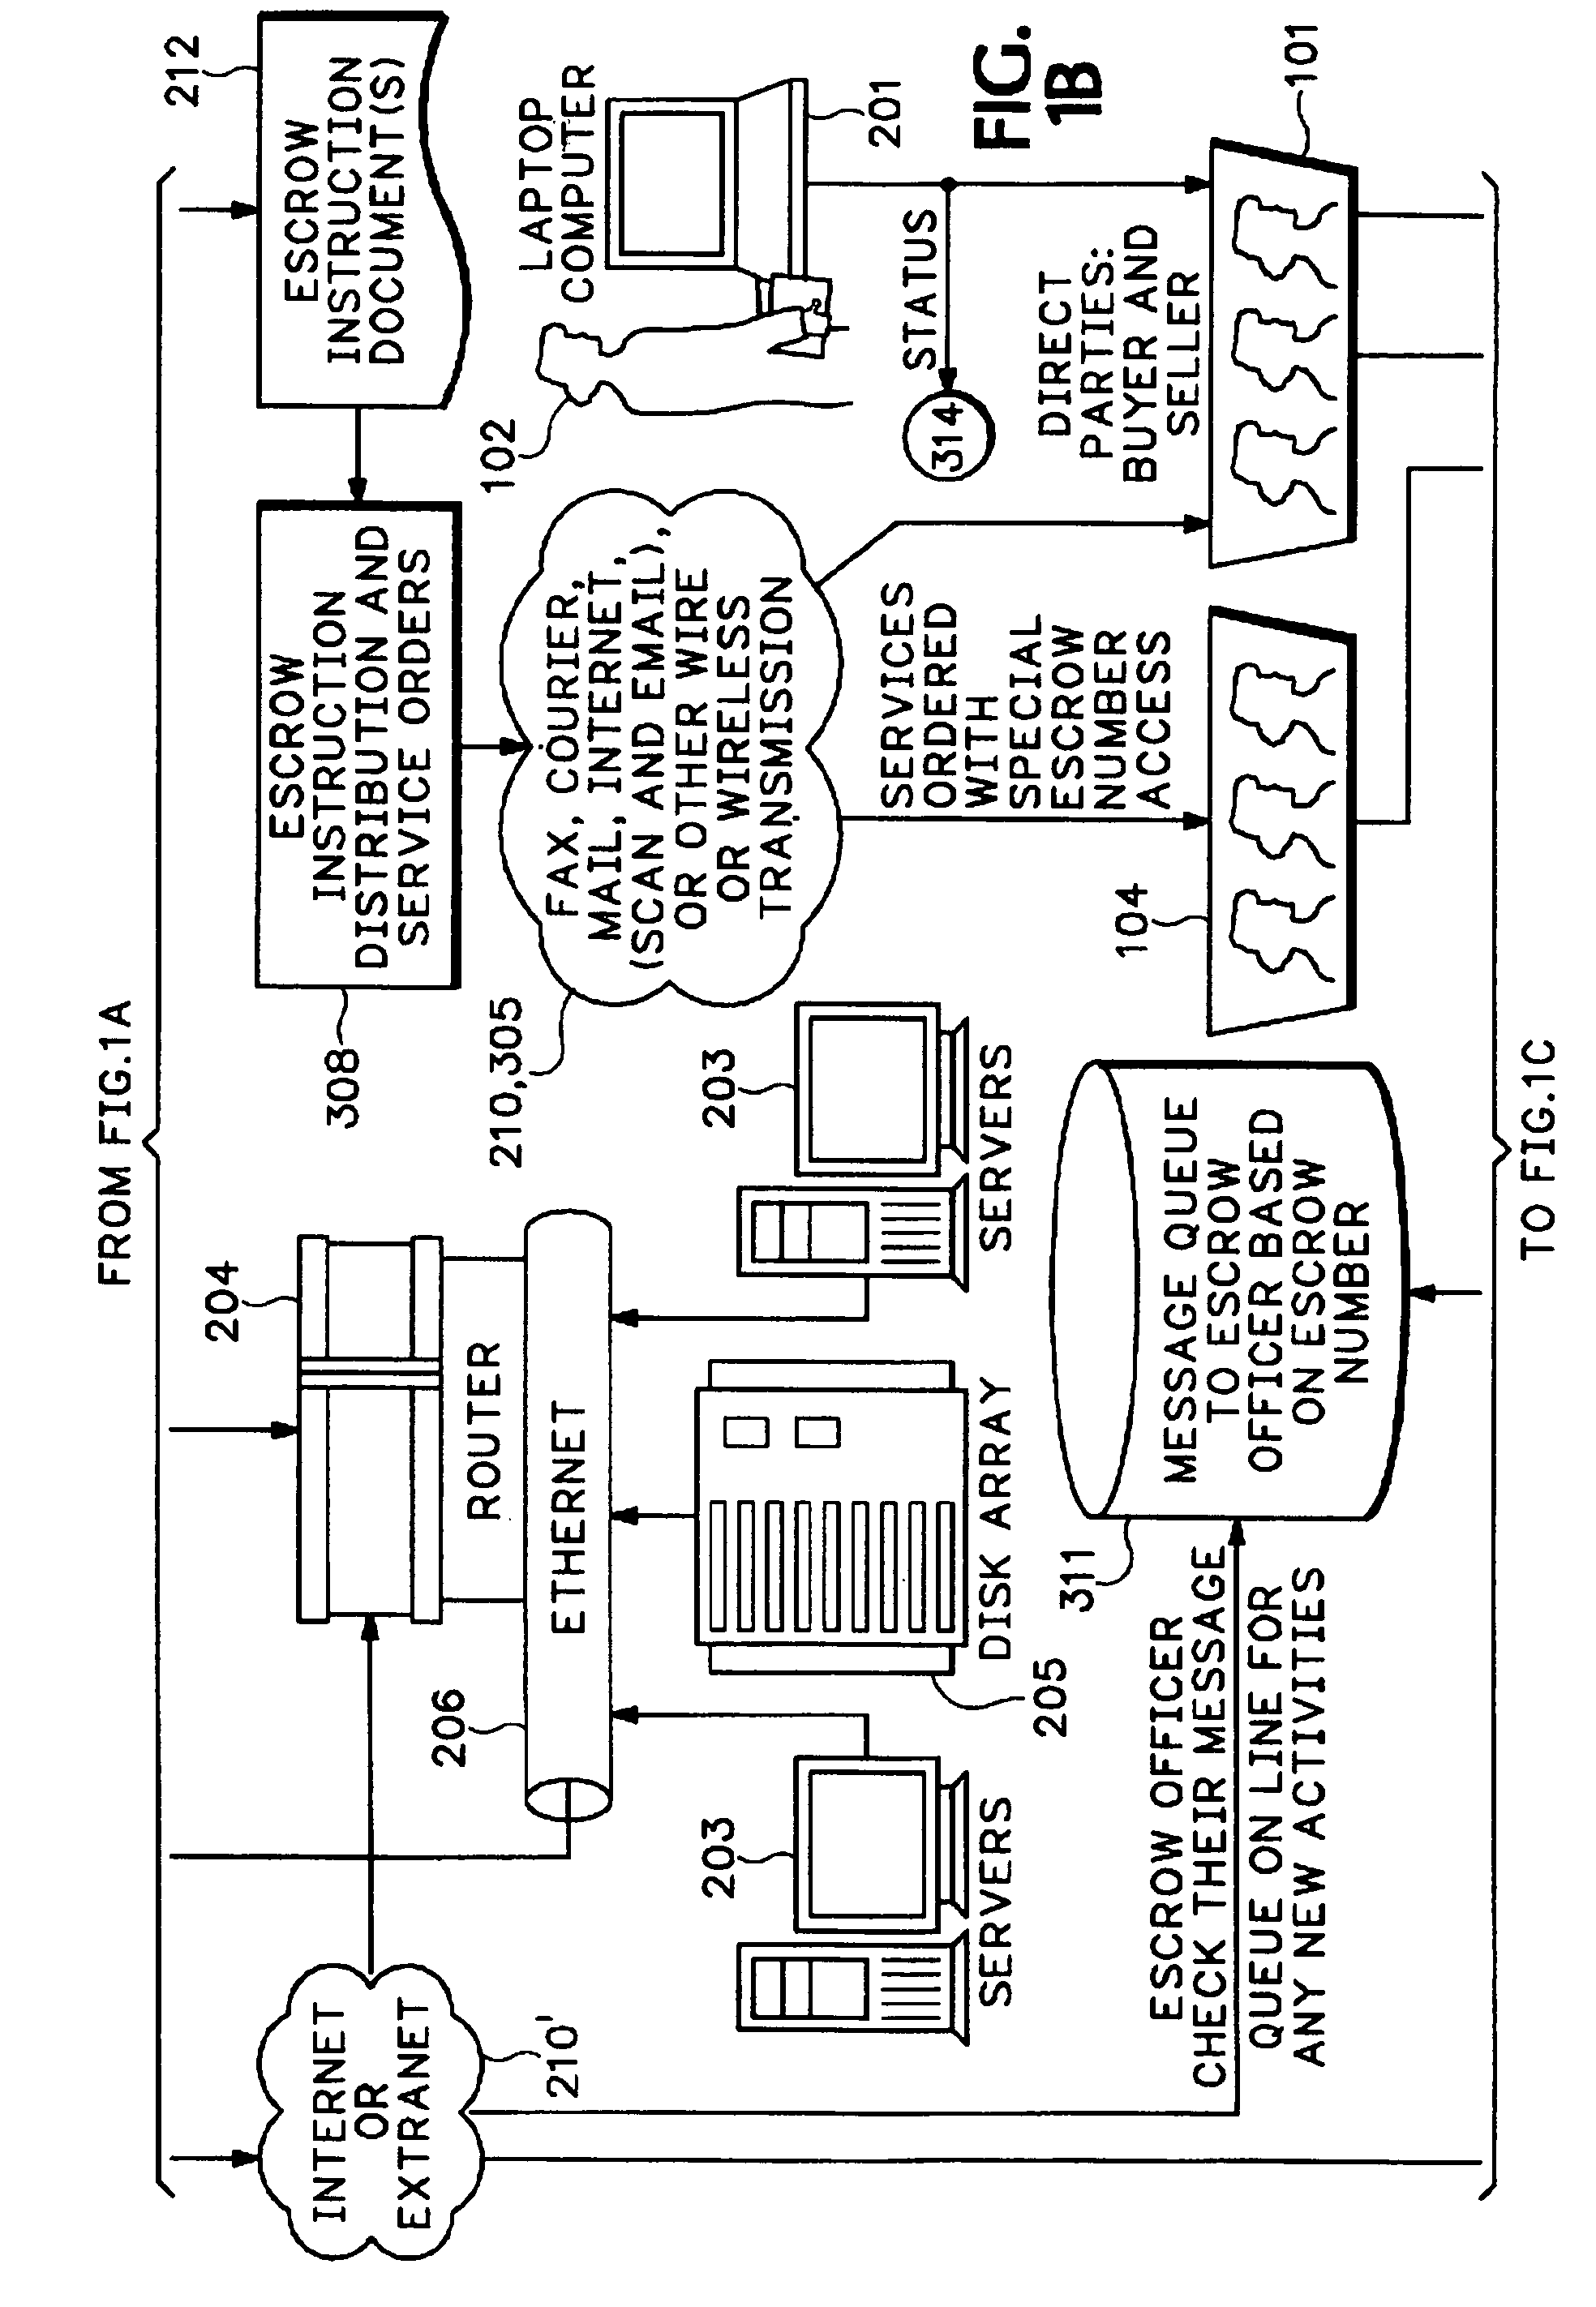 Method and apparatus for processing escrow transactions